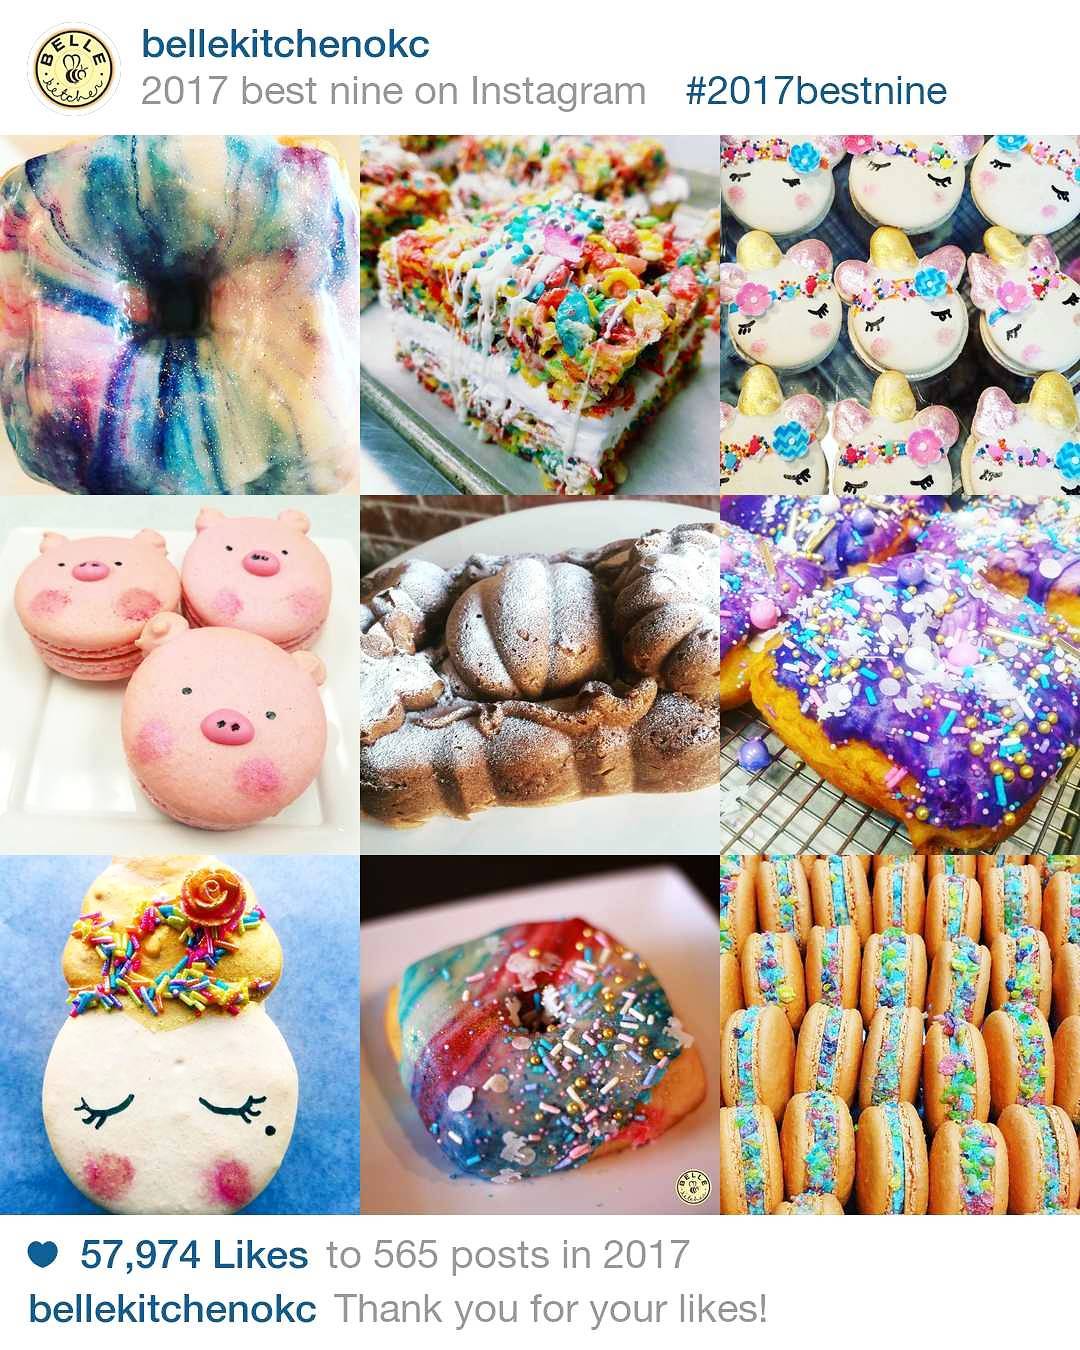 Happy New Year from the Bakers @Belle!!! We are so happy you included us in your 2017!!!
👍
Looks like the 2017 sparkly doughnuts and glammed out macarons were your favs! We can’t wait to create in 2018!!! @bellekitchenokc @bellekitchendd #macarons #macaron #doughnut #doughnuts #donut #donuts #BestOf2017 #fresh #real #instagood #instafood #foodie #2017 #HappyNewYear #pastry #love #OKC #beautiful #bellekitchen